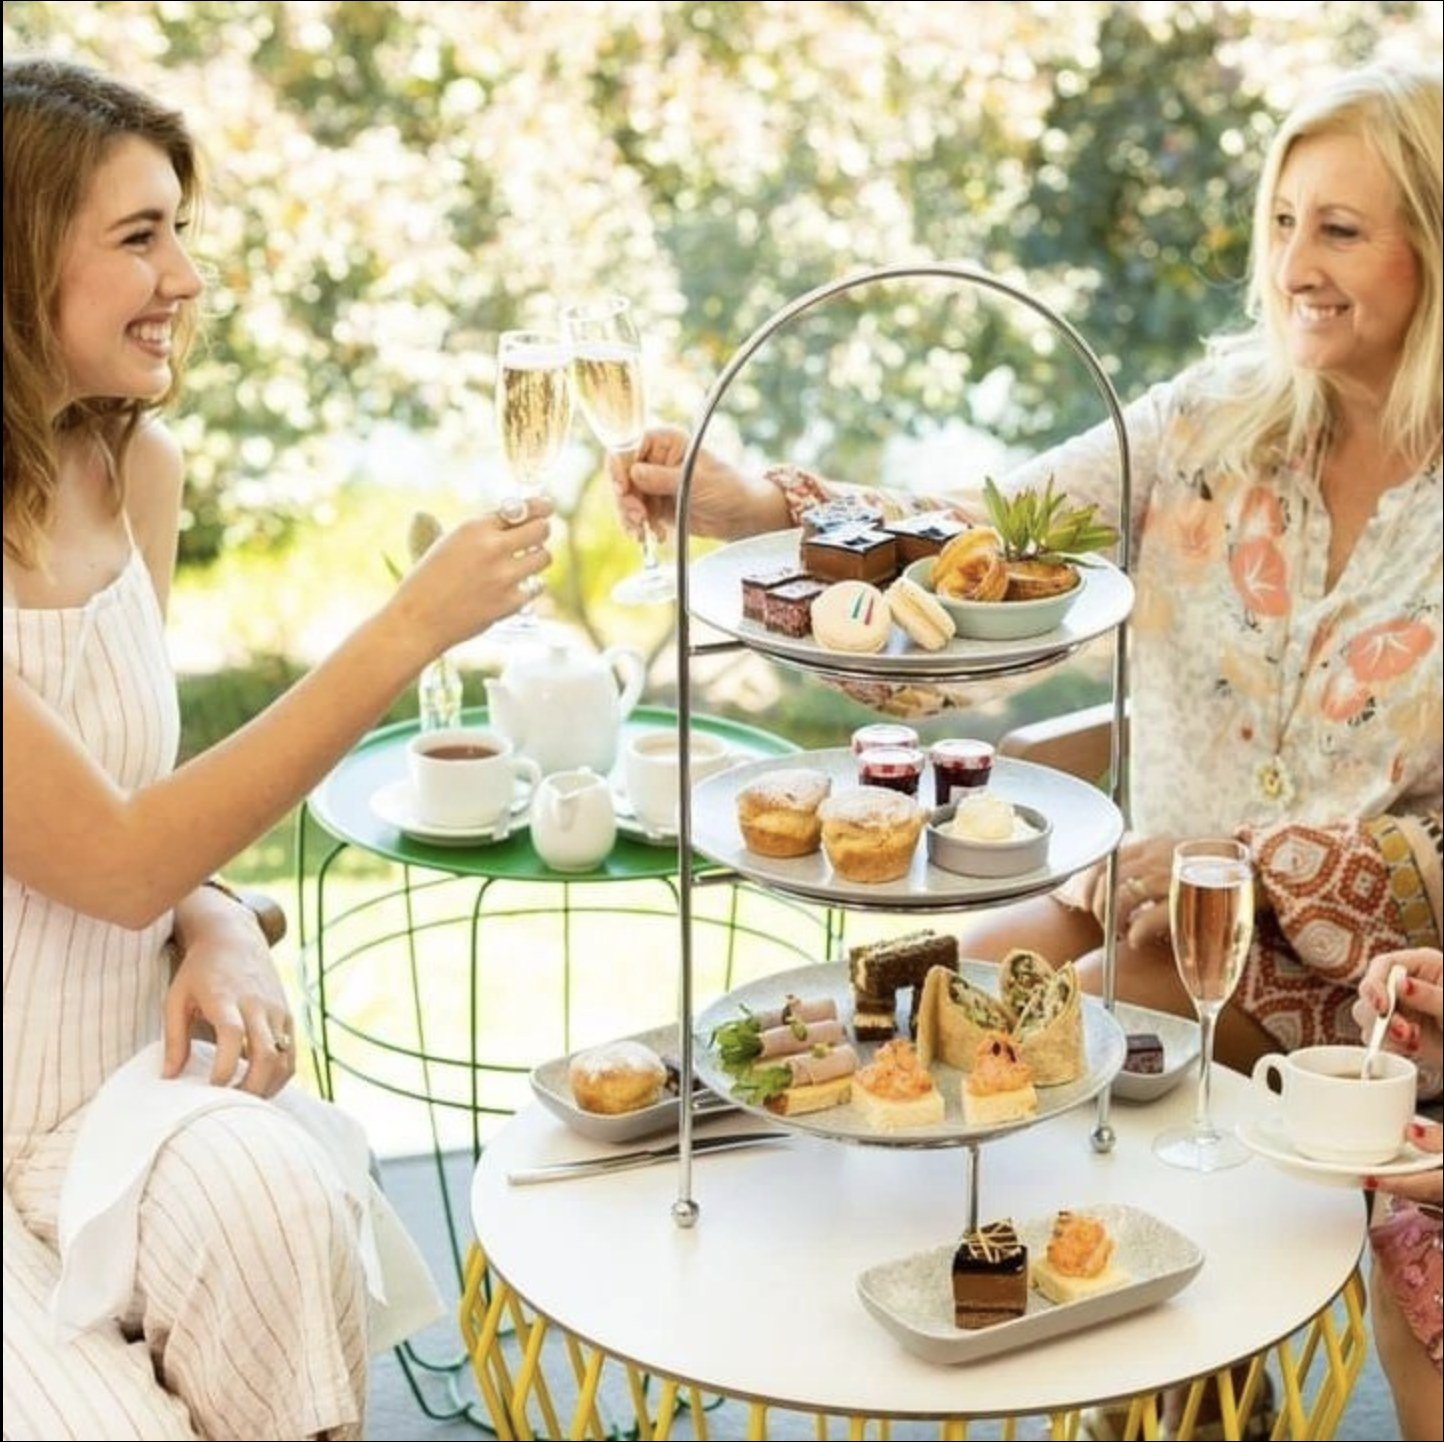 Diamond Strings Solo violinist is performing for the Mother&rsquo;s Day High Tea at Barretts Restaurant, Pullman Magenta Shores Resort!

Spoil mum this Mother&rsquo;s Day and indulge in an afternoon of delightful sweet treats, breathtaking views and 